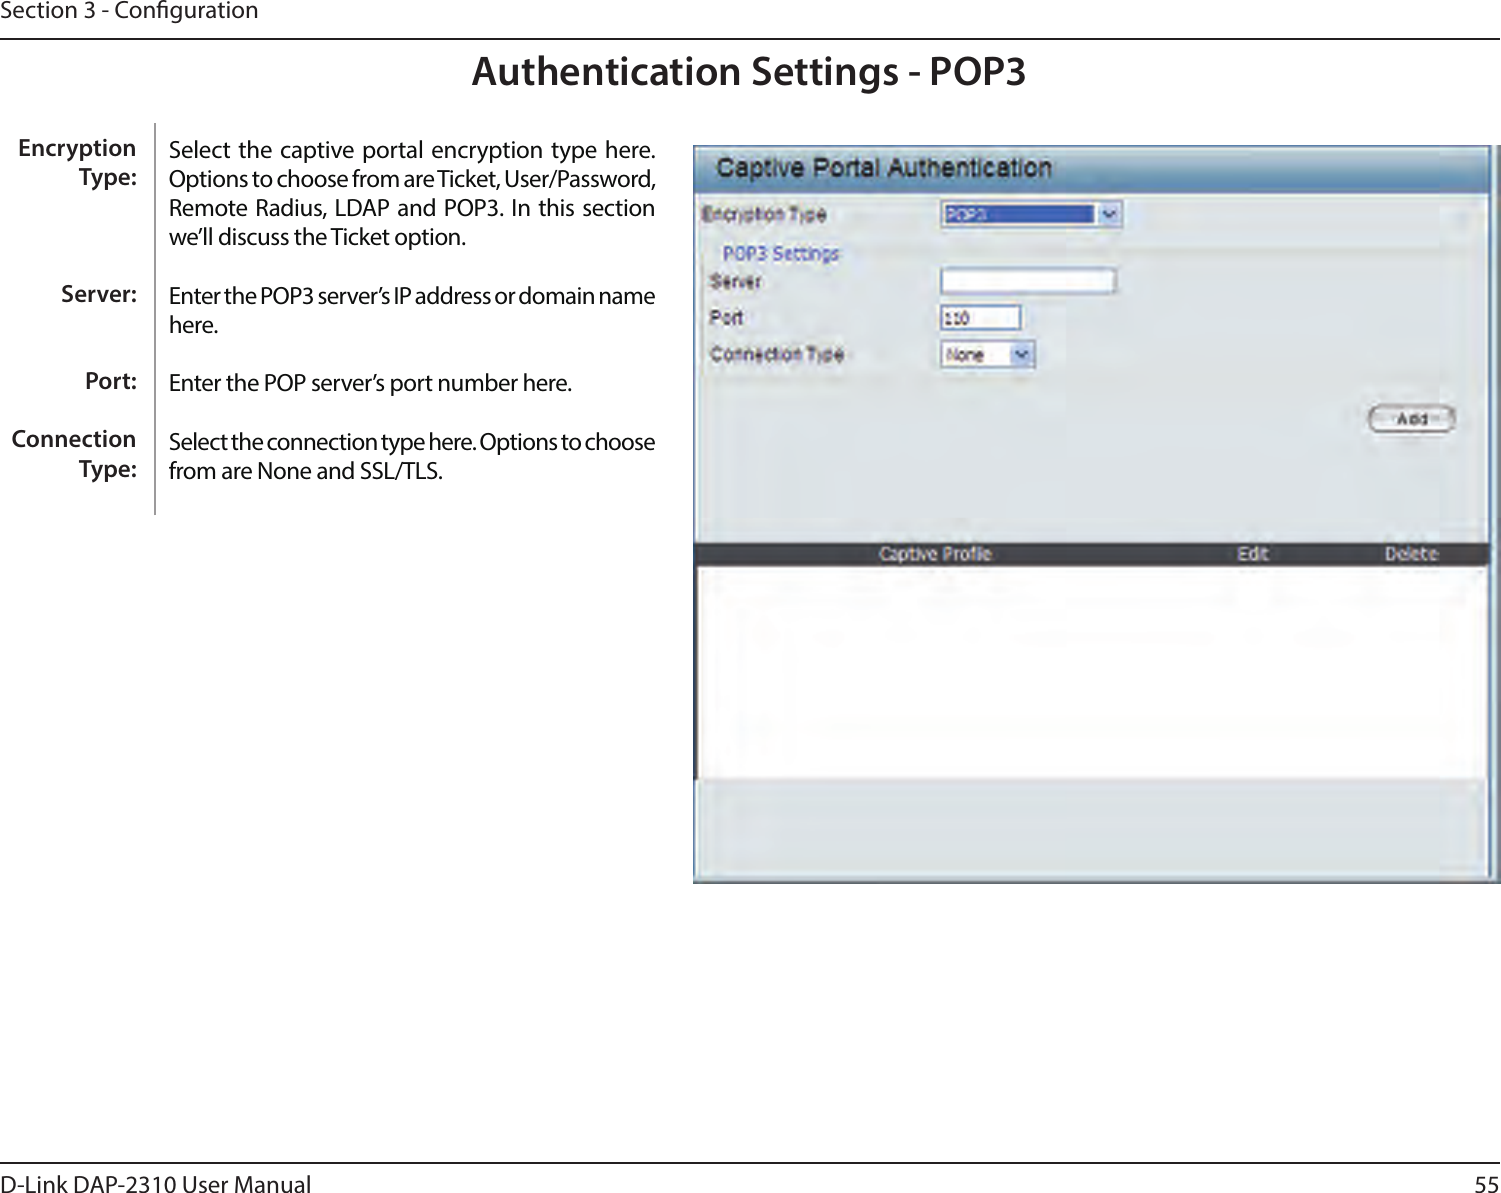 55D-Link DAP-2310 User ManualSection 3 - CongurationAuthentication Settings - POP3Select the captive portal encryption type here. Options to choose from are Ticket, User/Password, Remote Radius, LDAP and POP3. In this section we’ll discuss the Ticket option.Enter the POP3 server’s IP address or domain name here.Enter the POP server’s port number here.Select the connection type here. Options to choose from are None and SSL/TLS.Encryption Type:Server:Port:Connection Type: